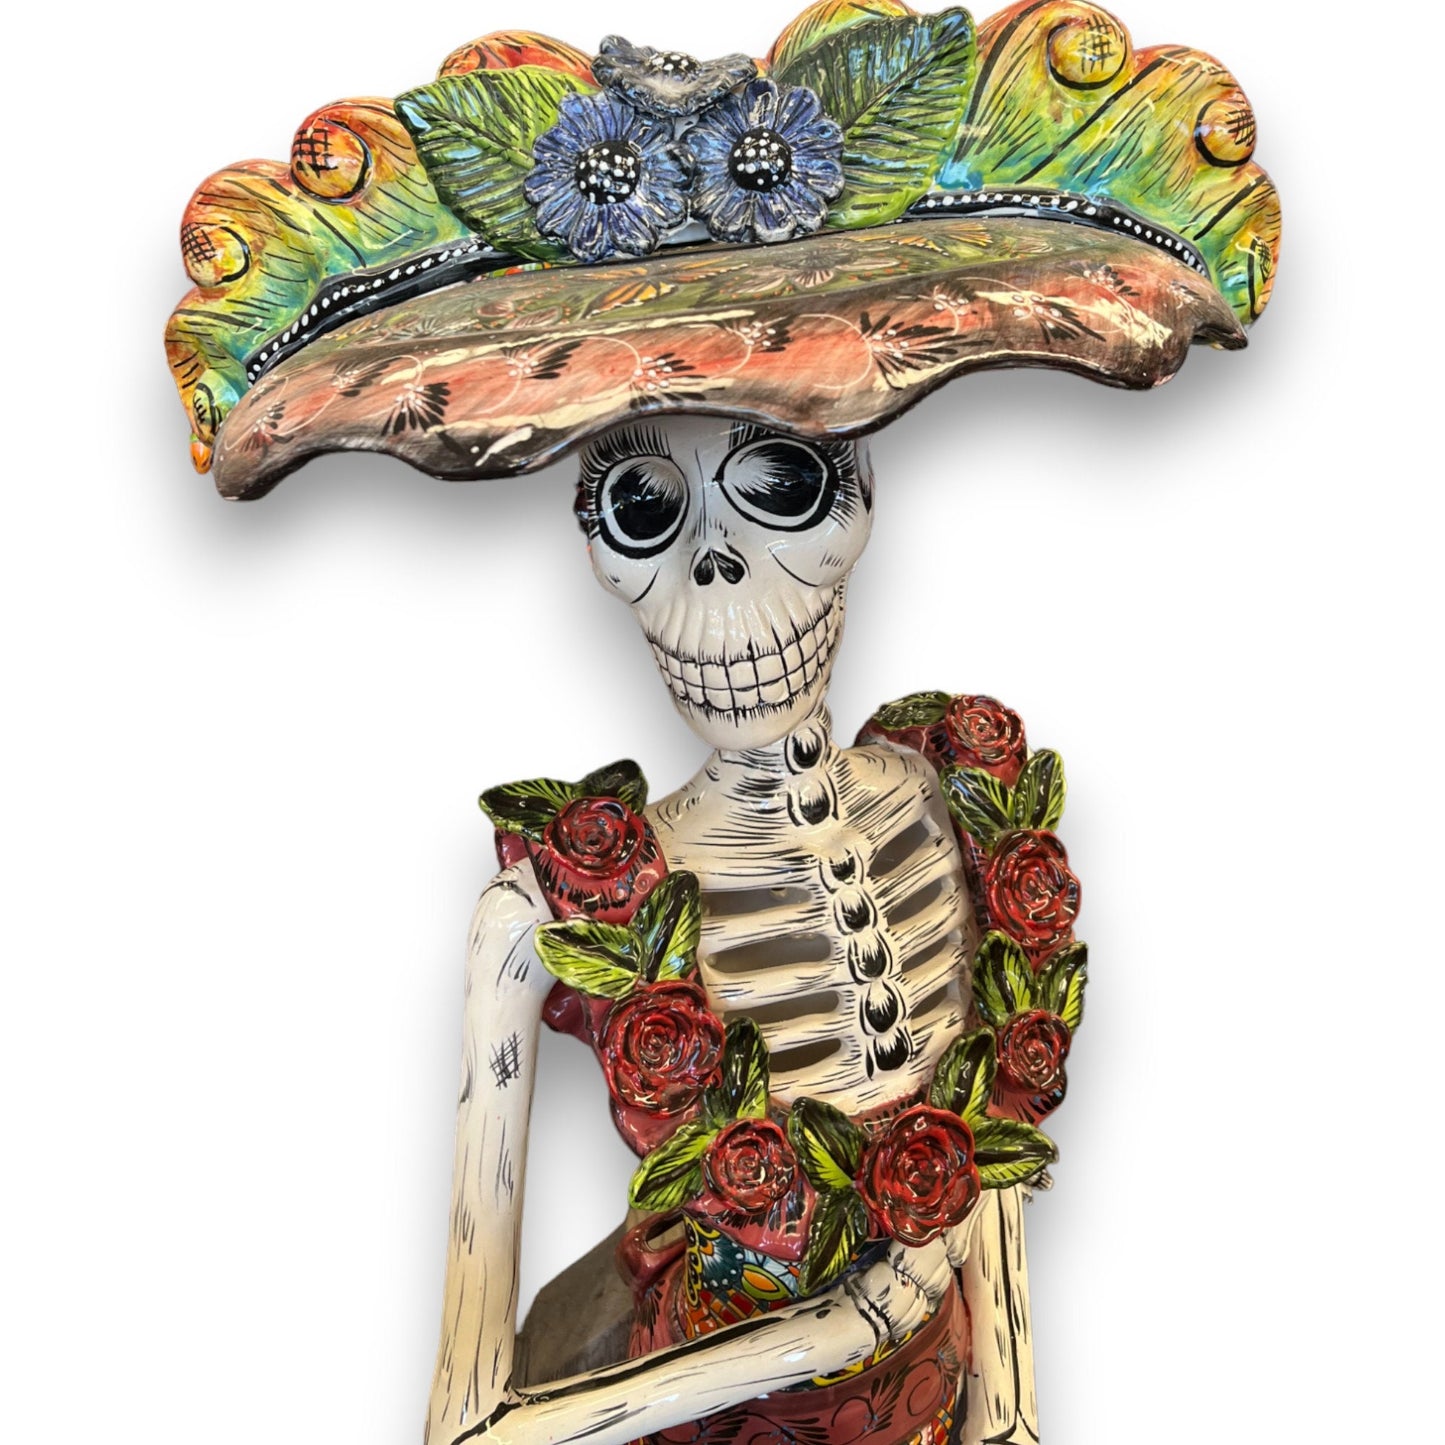 Talavera Catrina Day of the Dead Statue | 4'10" Life-Sized Figurine with Unique Painted Details